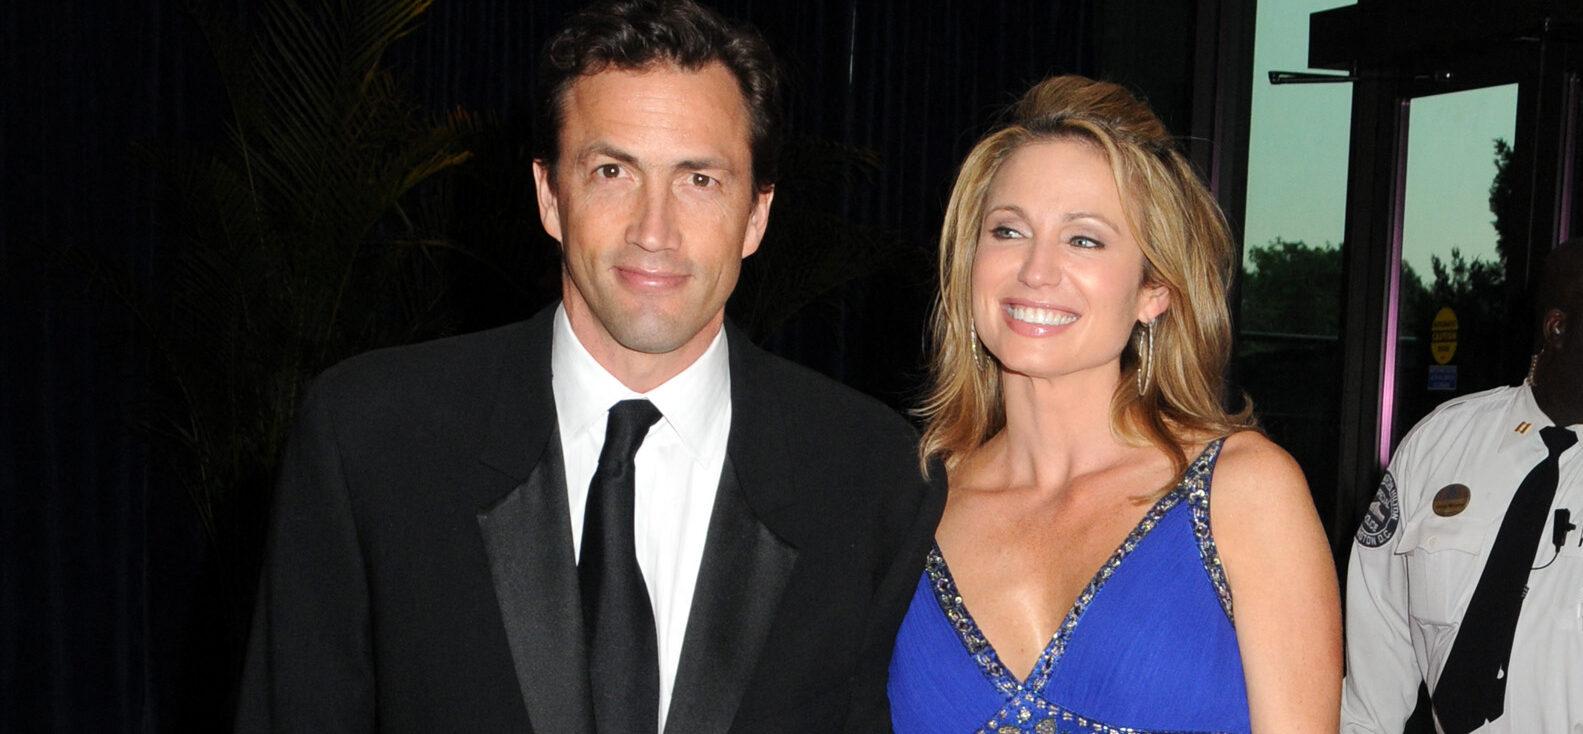 Fans Encourage Amy Robach’s Husband, Andrew Shue, To ‘RUN’ Away